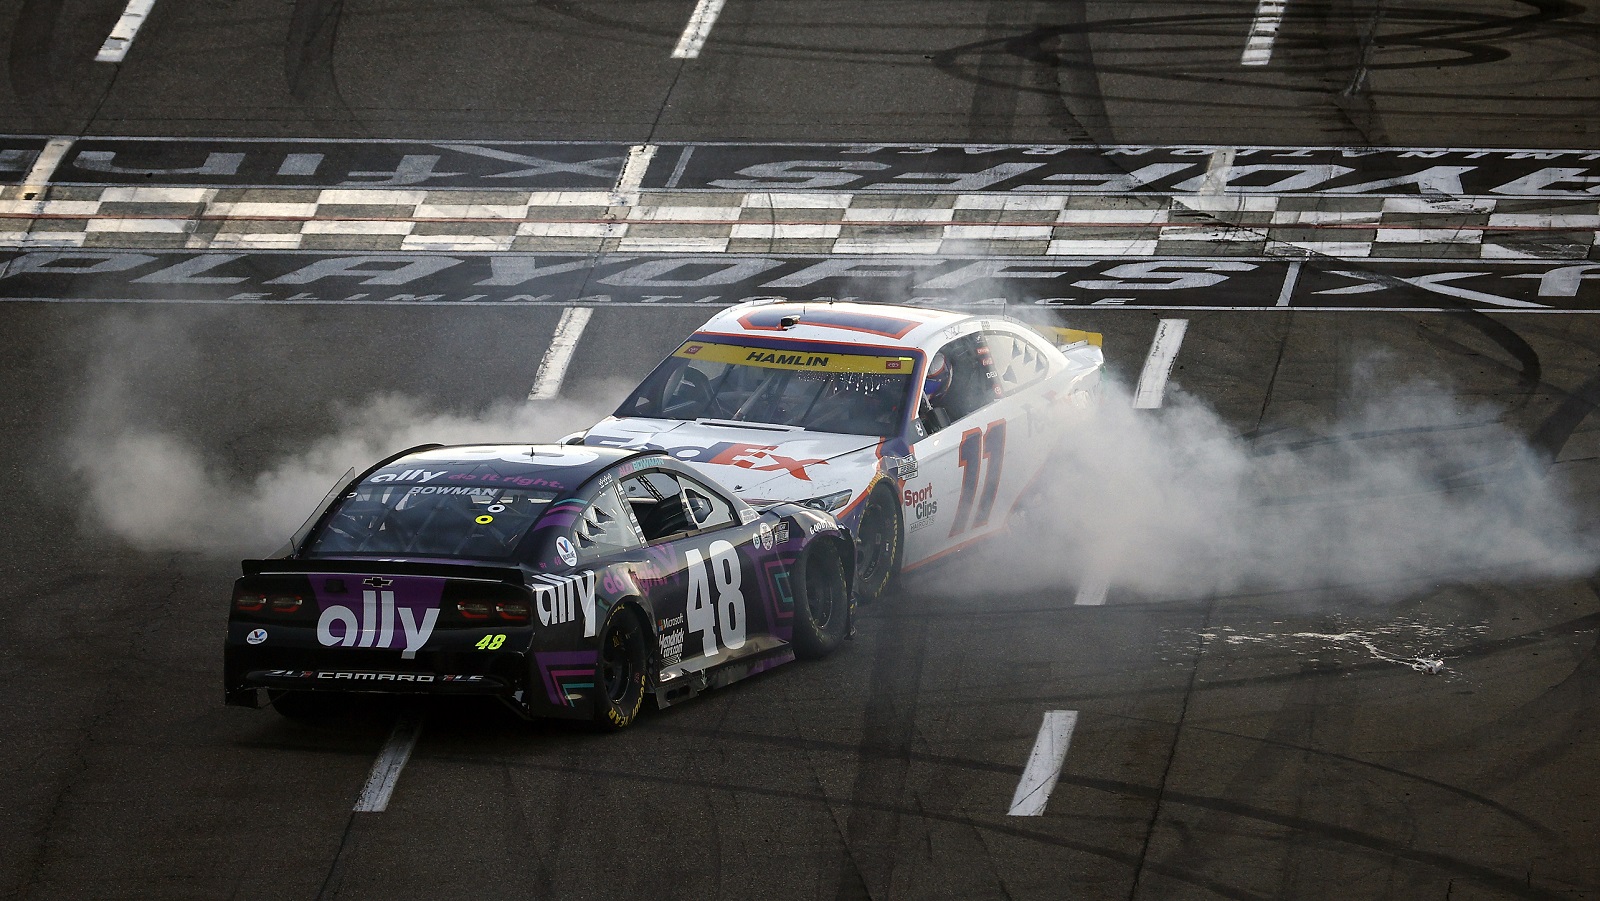 Denny Hamlin impedes Alex Bowman's celebration after winning the NASCAR Cup Series Xfinity 500 at Martinsville Speedway on Oct. 31, 2021. | Jared C. Tilton/Getty Images